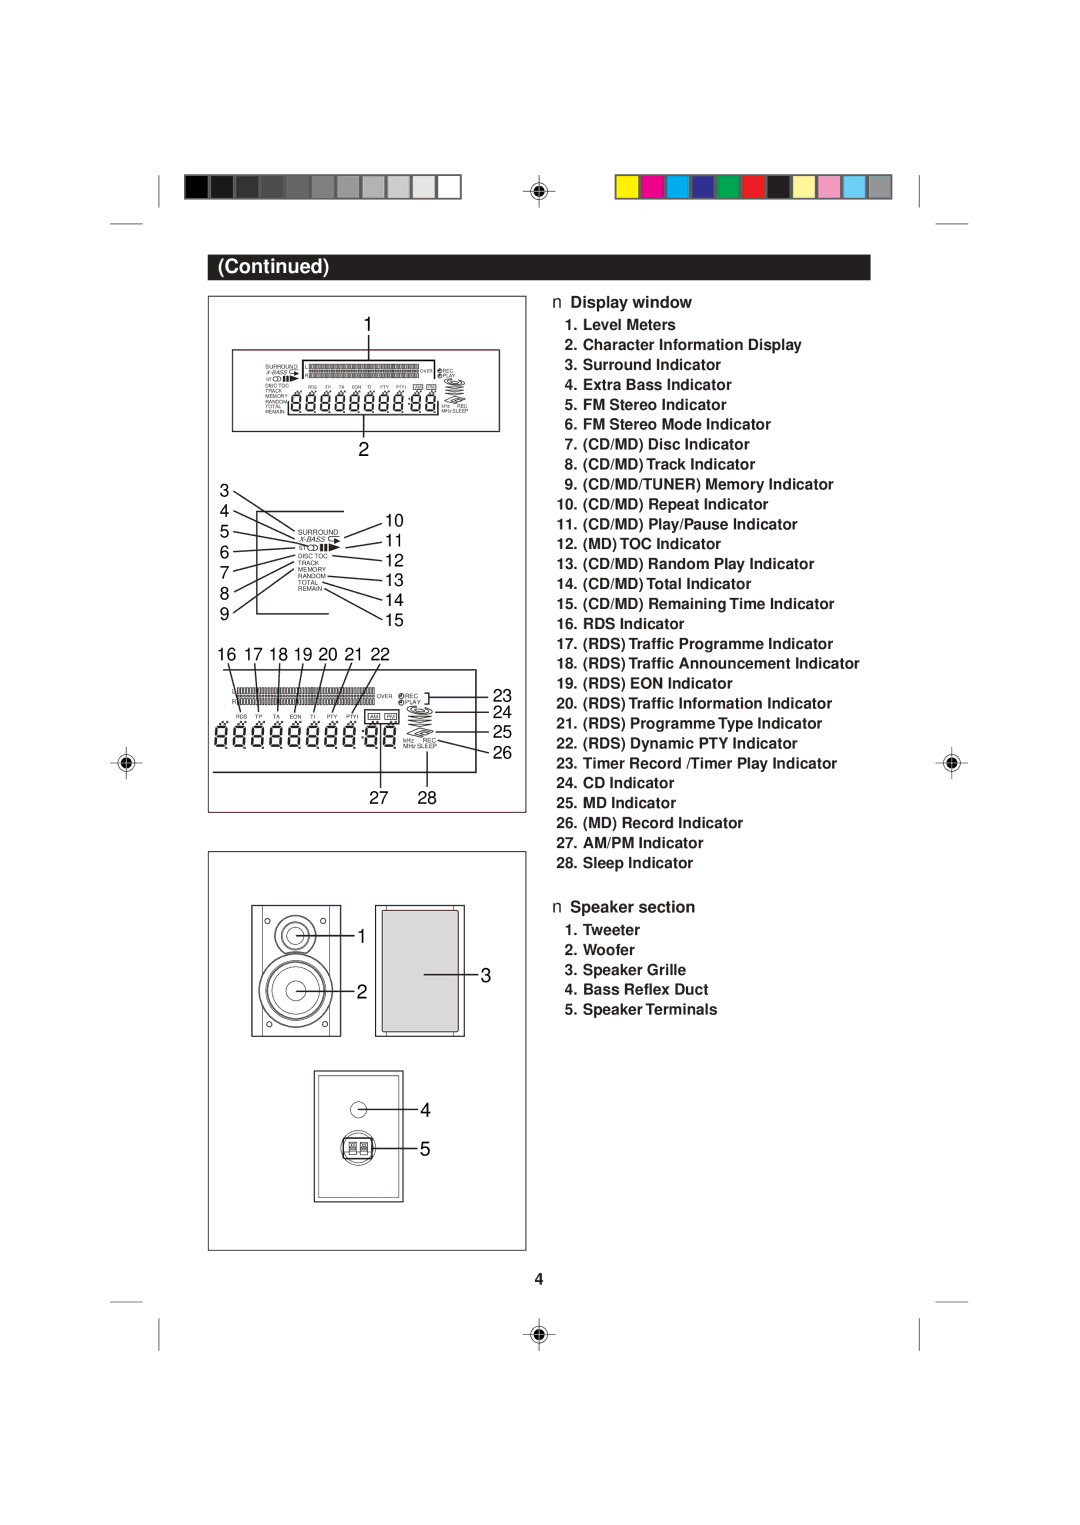 Sharp MD-M2H operation manual 16 17 18 19 20 21, Display window, Speaker section 